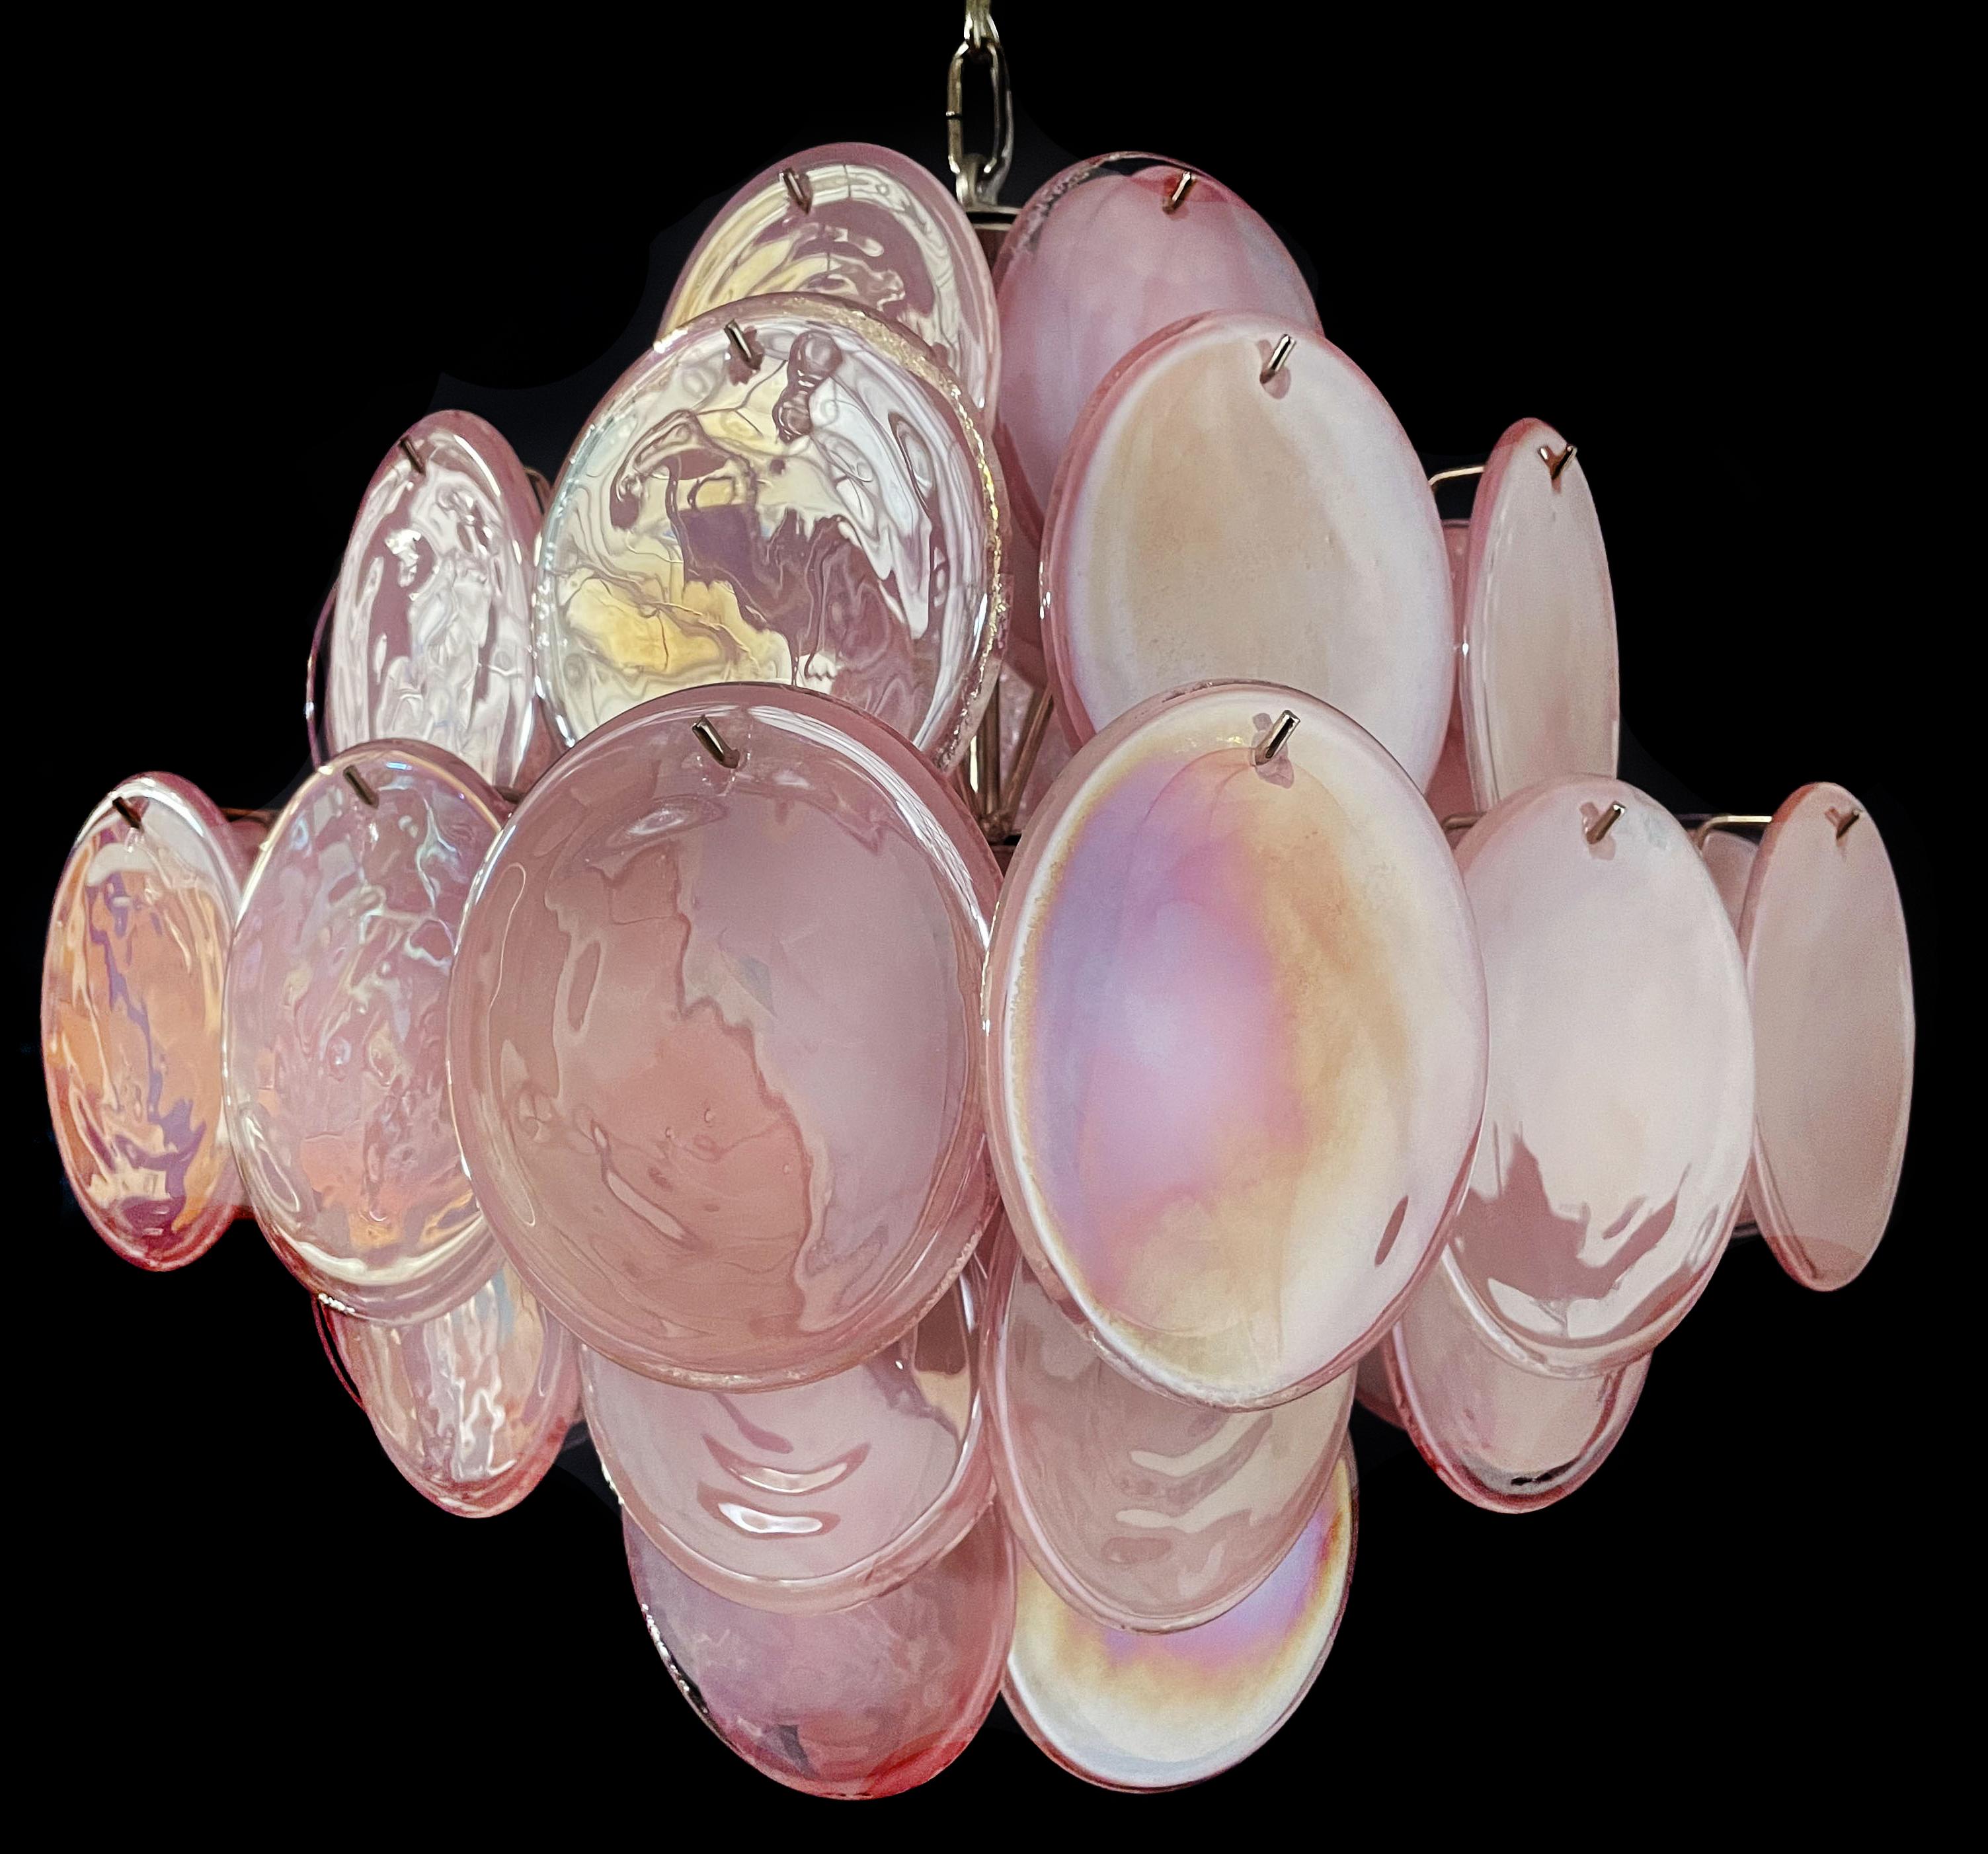 Vintage Italian Murano chandelier in Vistosi style. The chandelier has 36 fantastic iridescent alabaster pink discs in a nickel metal frame.
Period: late XX century
Dimensions: 44,50 inches (150 cm) height with chain; 19,40 inches (50 cm) height